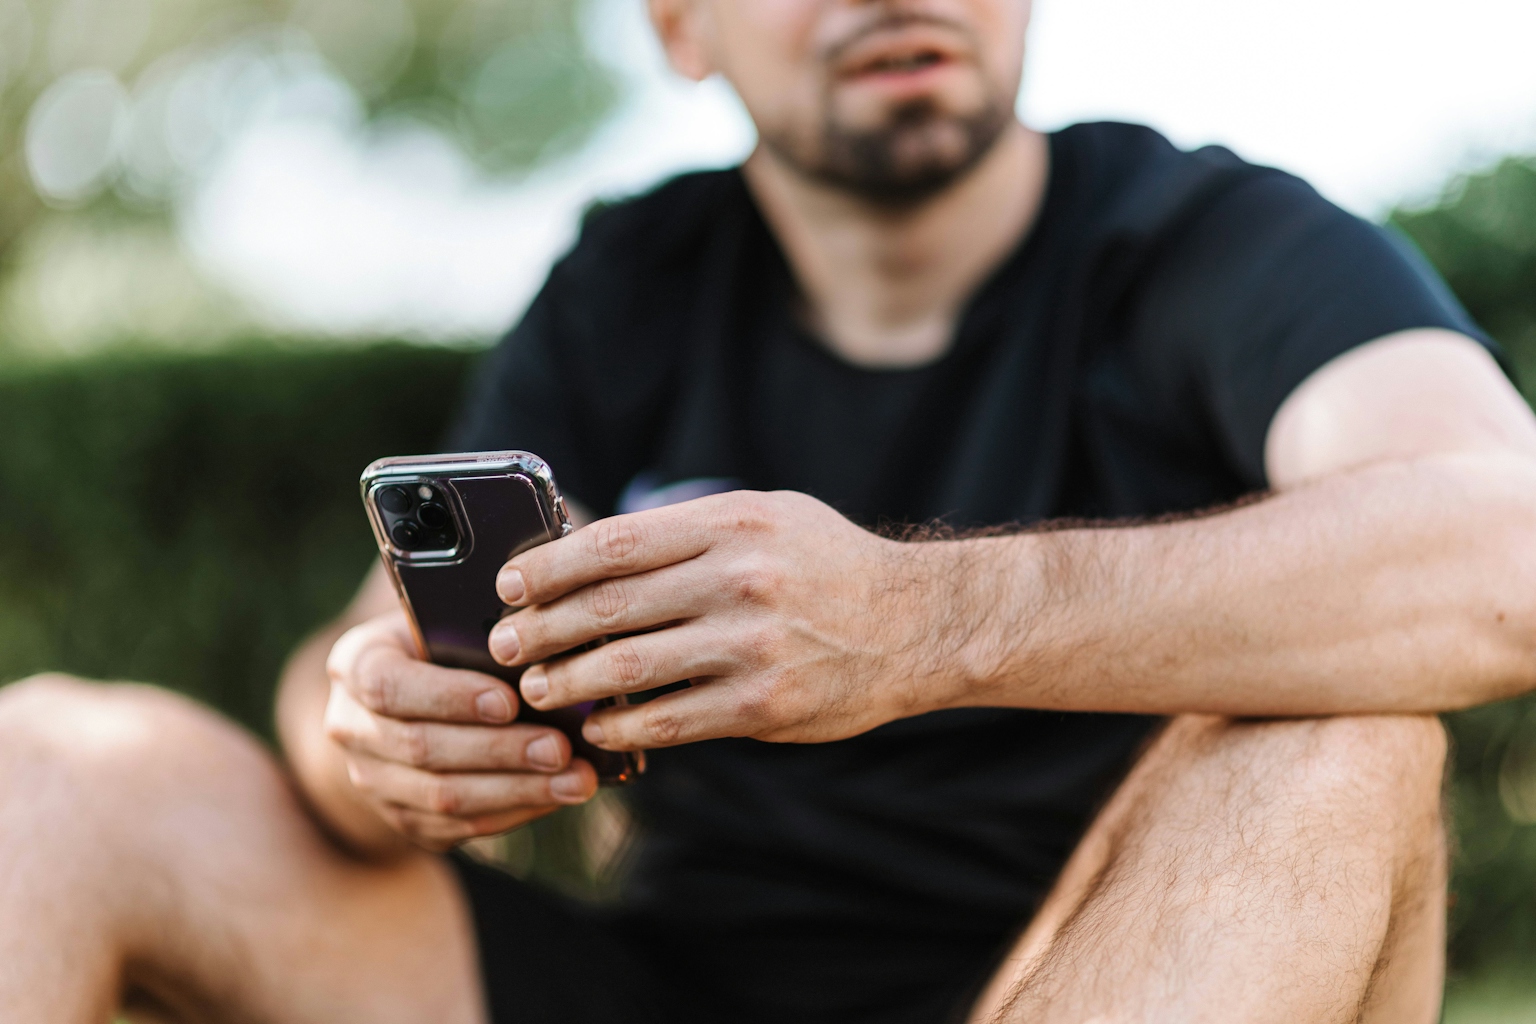 Man sitting with an iphone in his hands.